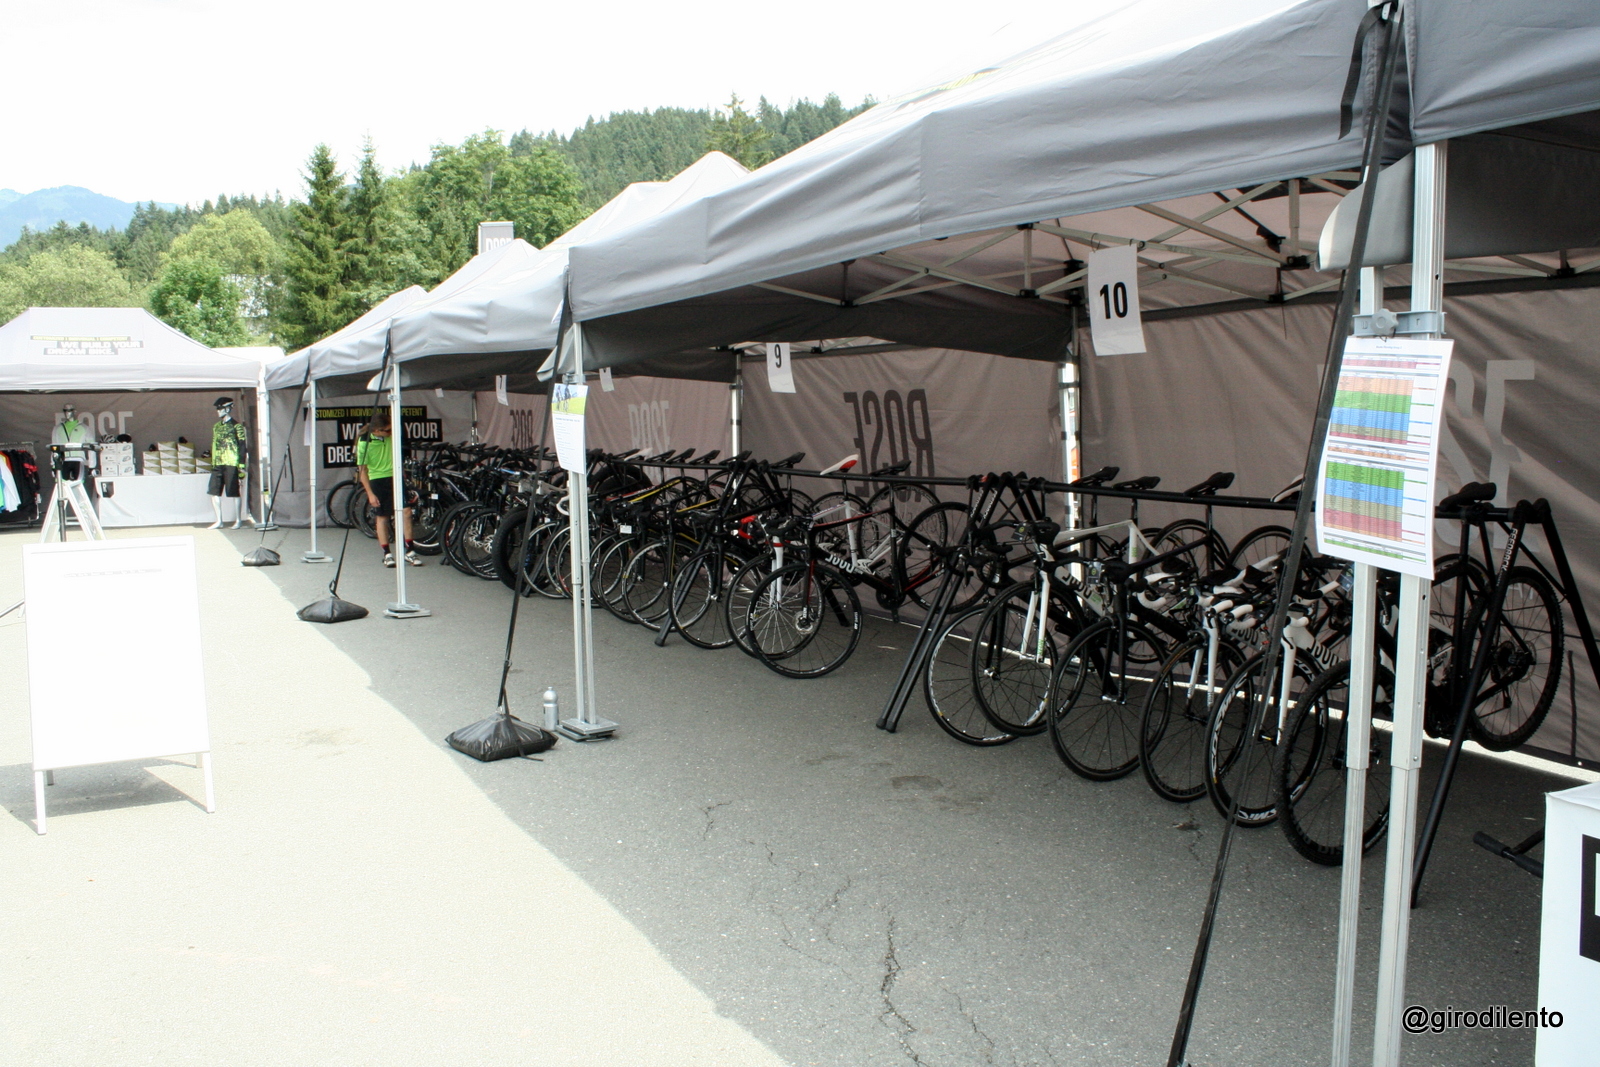 The selection of brand new Rose bikes available for the press to ride (first come first served)